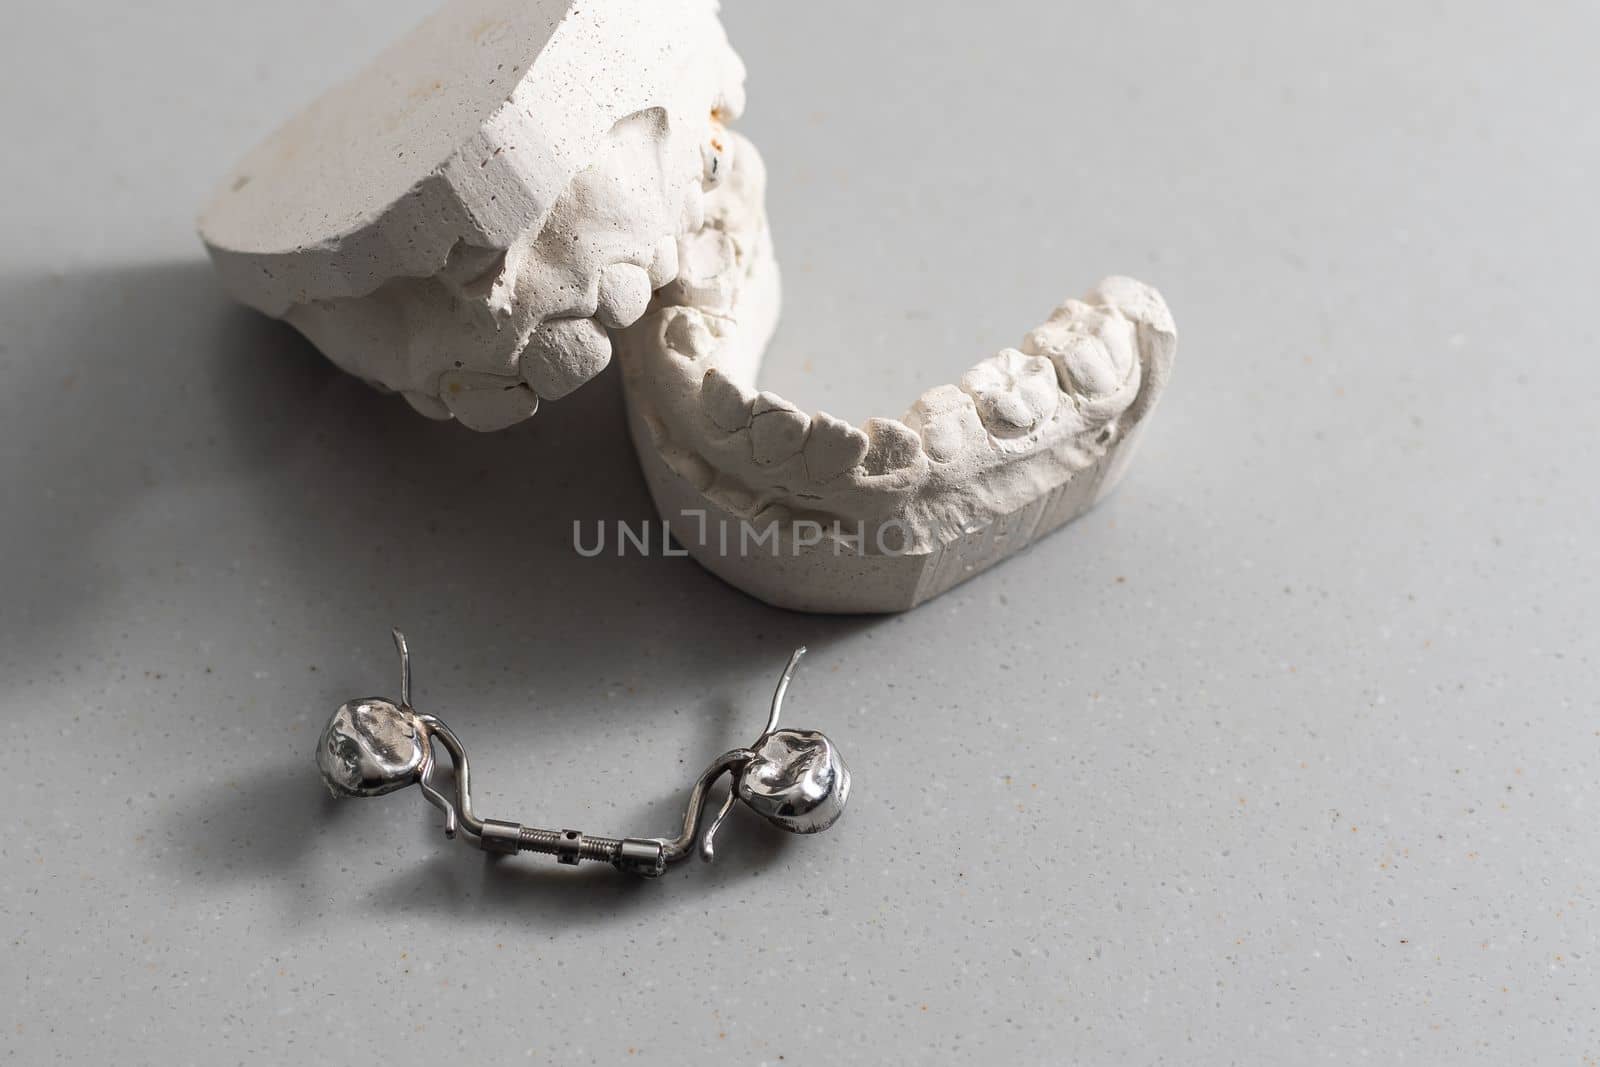 Plaster models of dental prostheses. Demonstration models of dentures. Visual demonstration of orthodontic prostheses. False teeth. Prosthetic dentistry. Dental plates top view. Artificial tooth by Andelov13